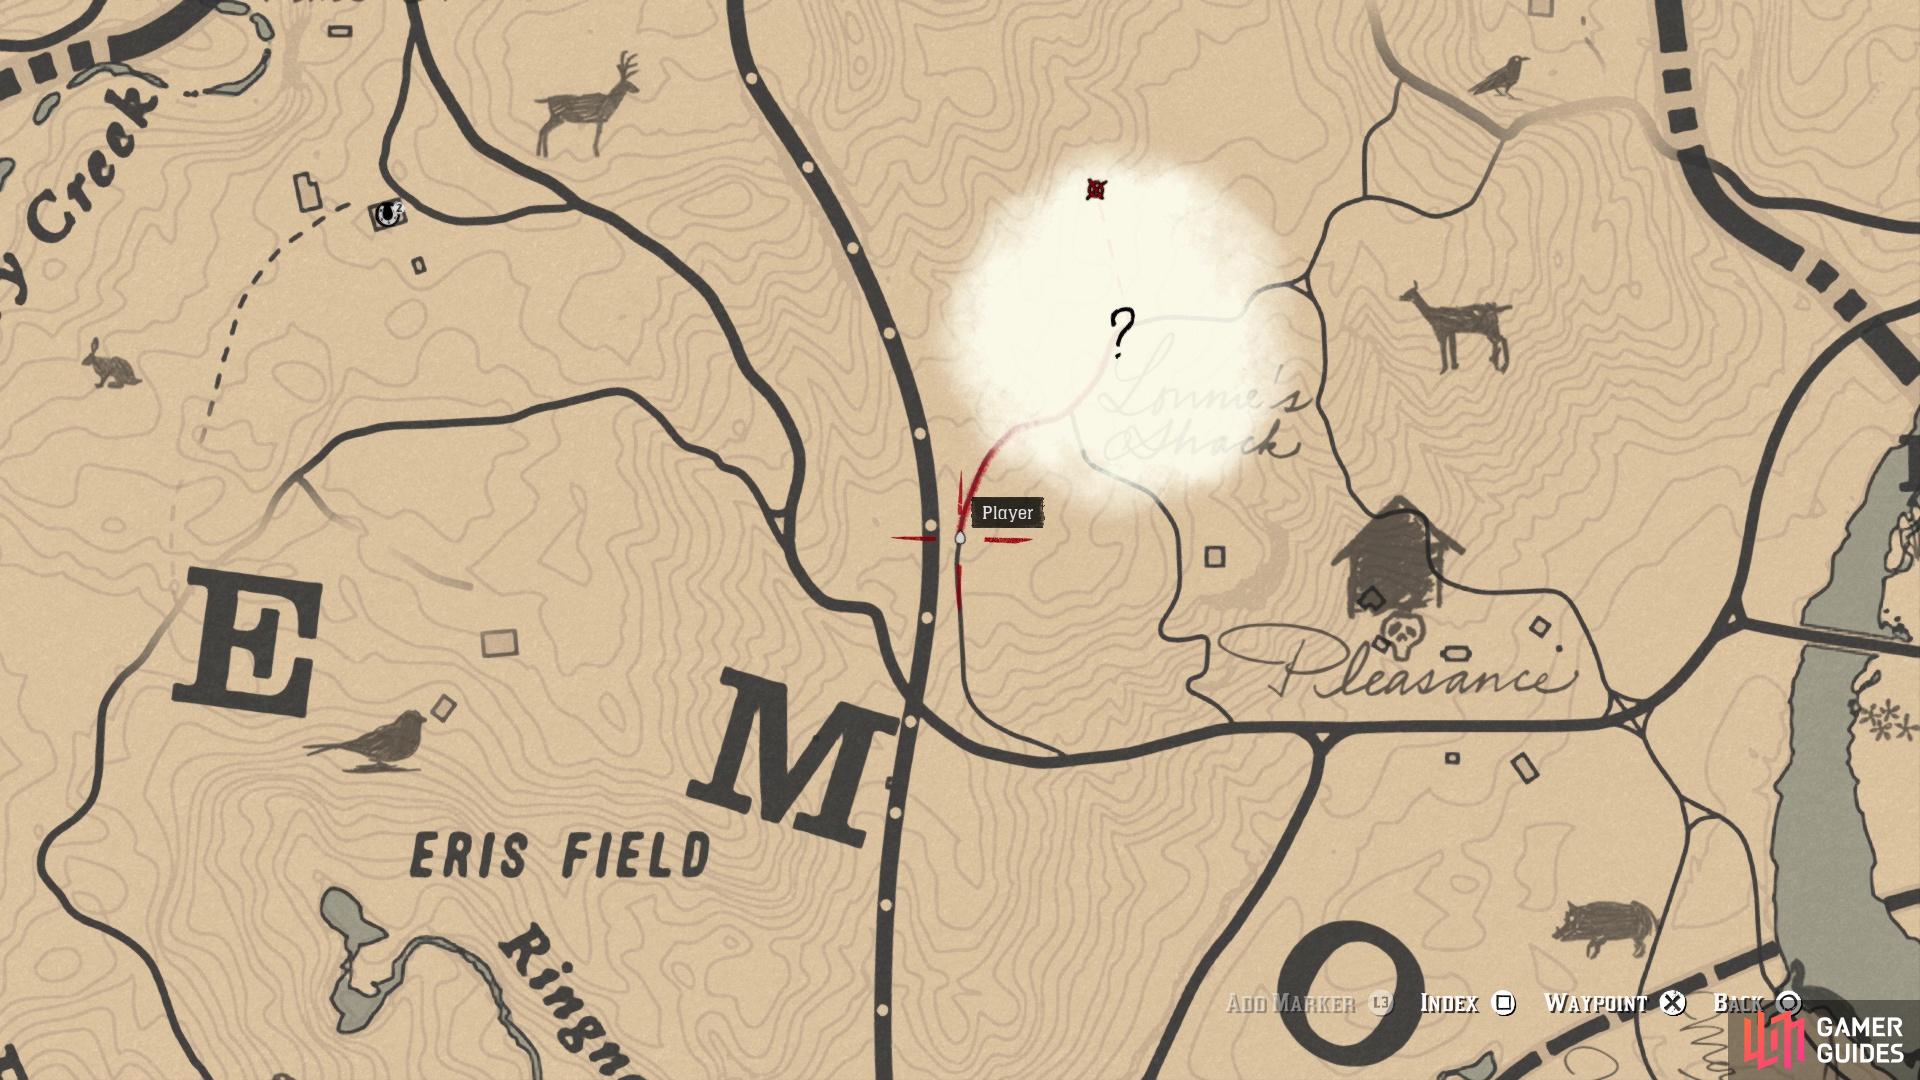 The general location of the Stranger for this mission